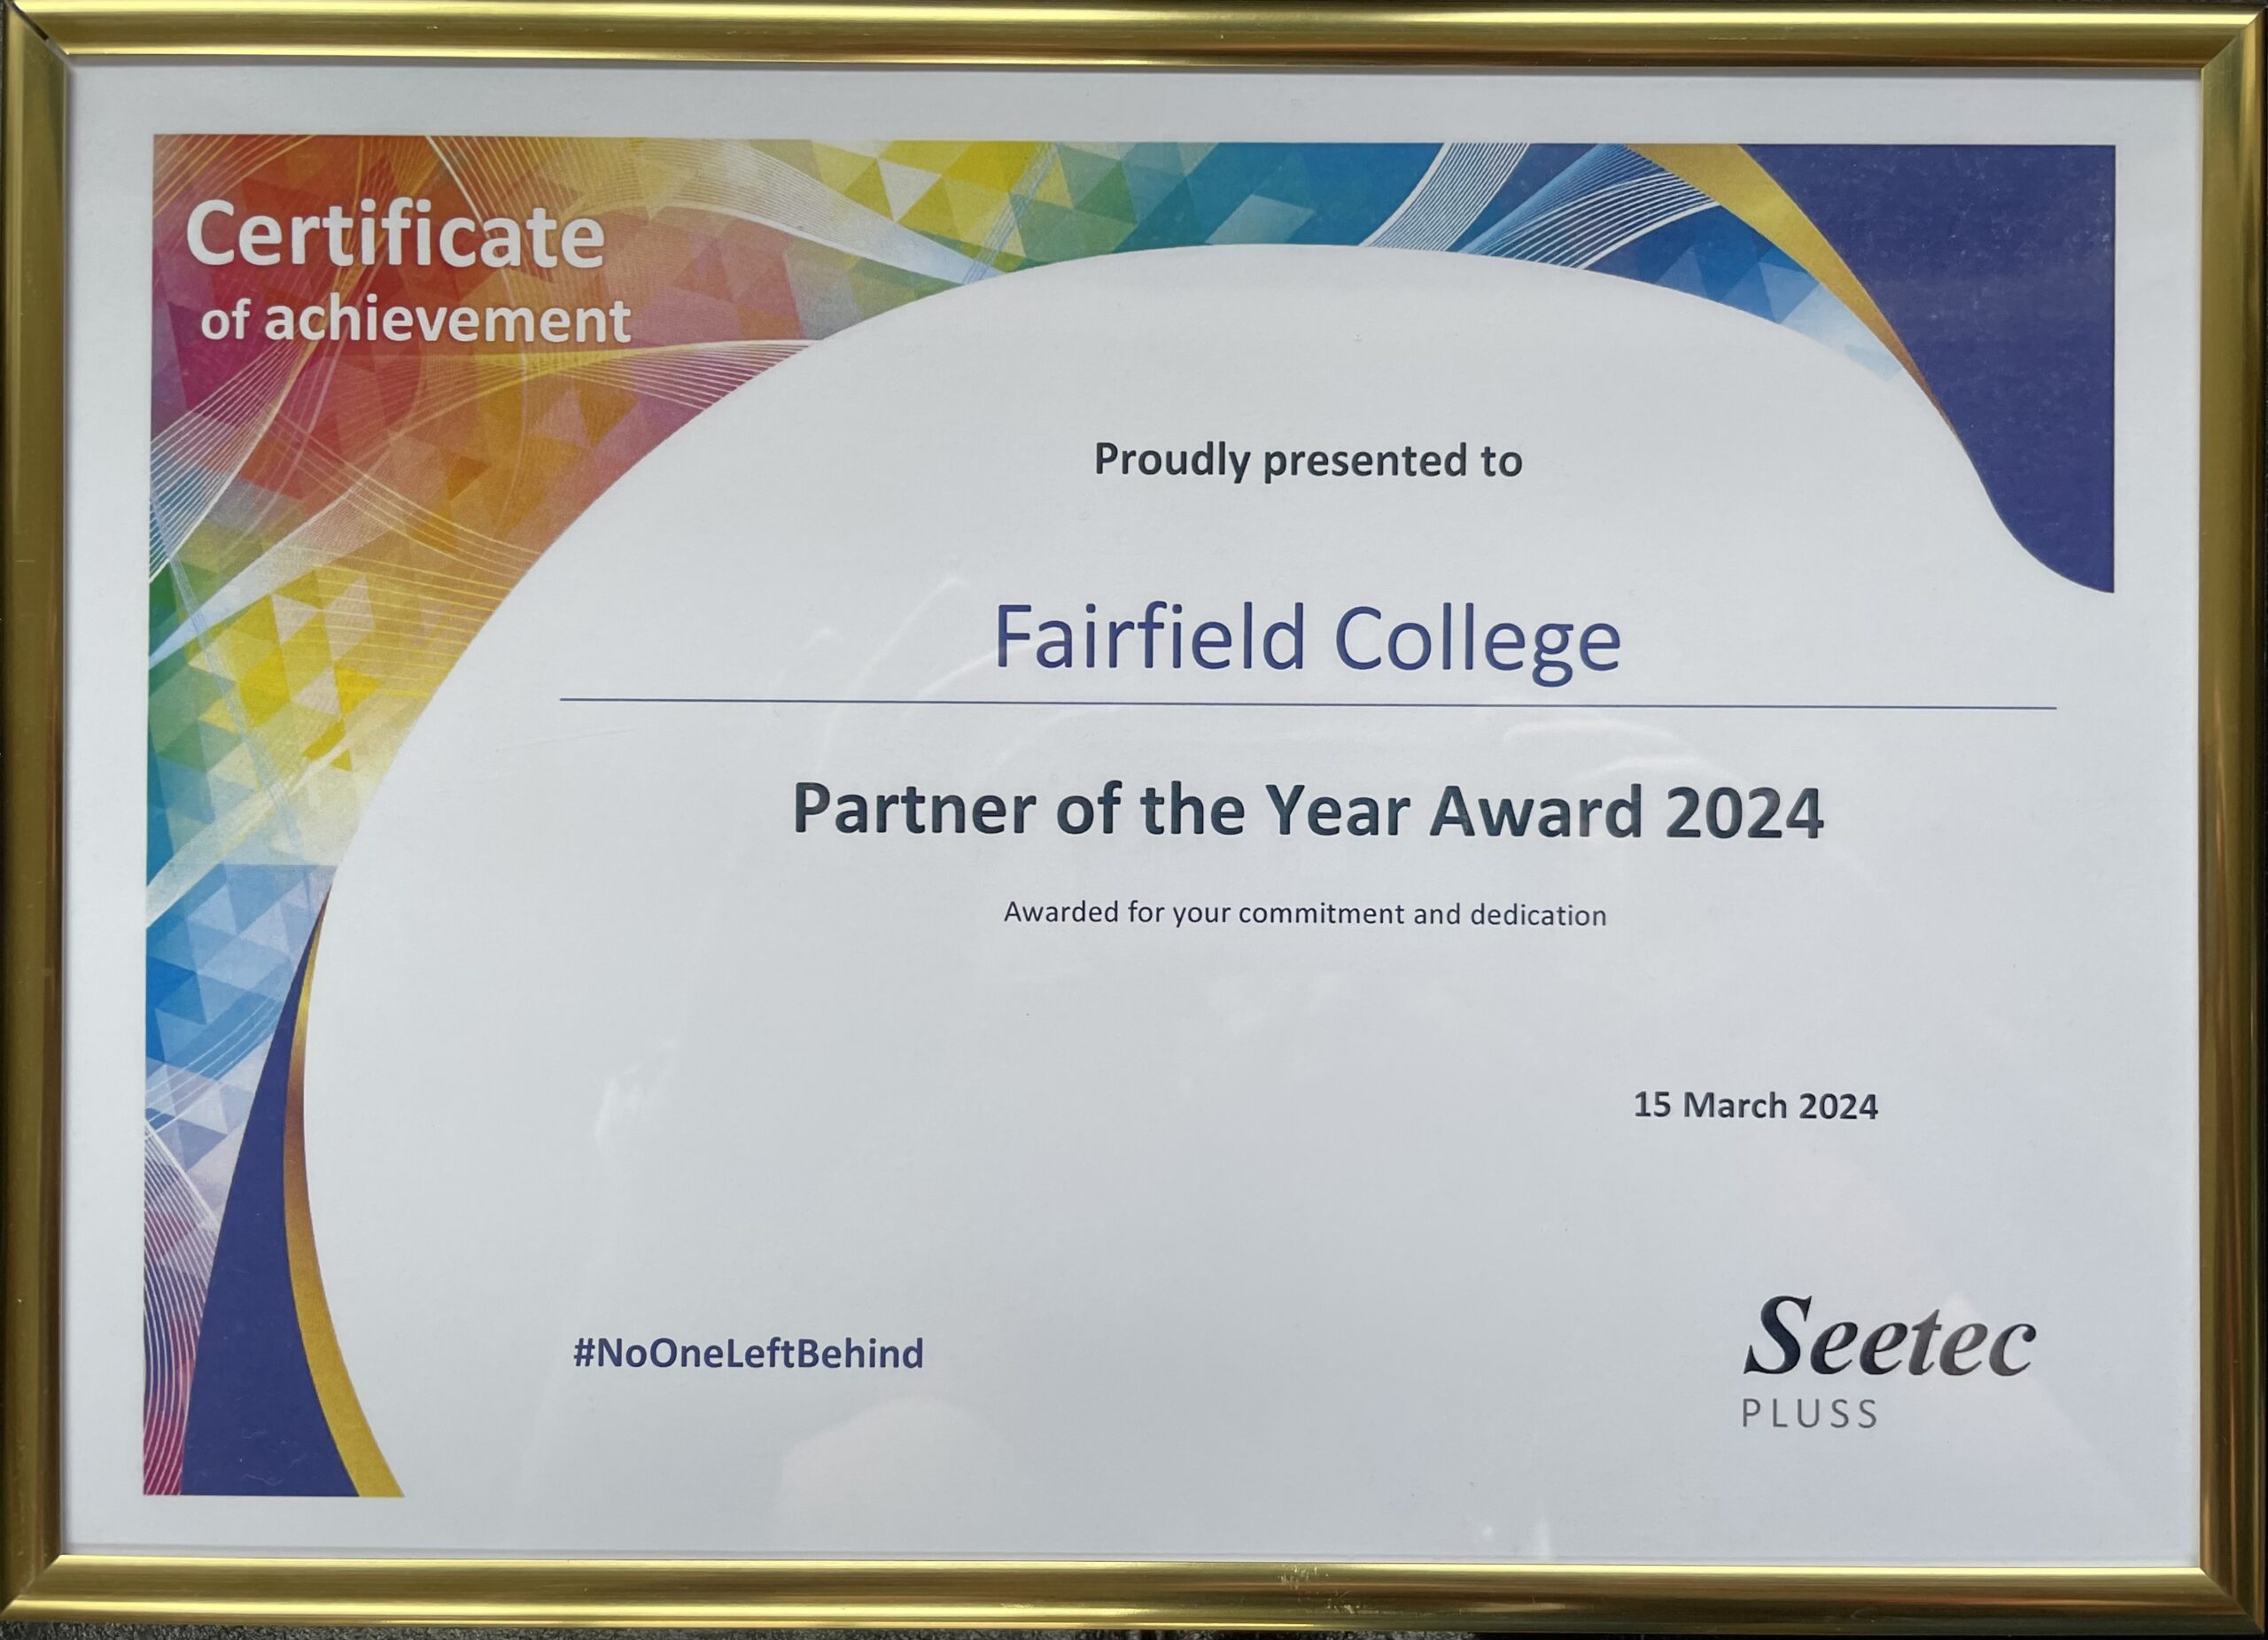 Partner of the year 2024 from Seetec Pluss.